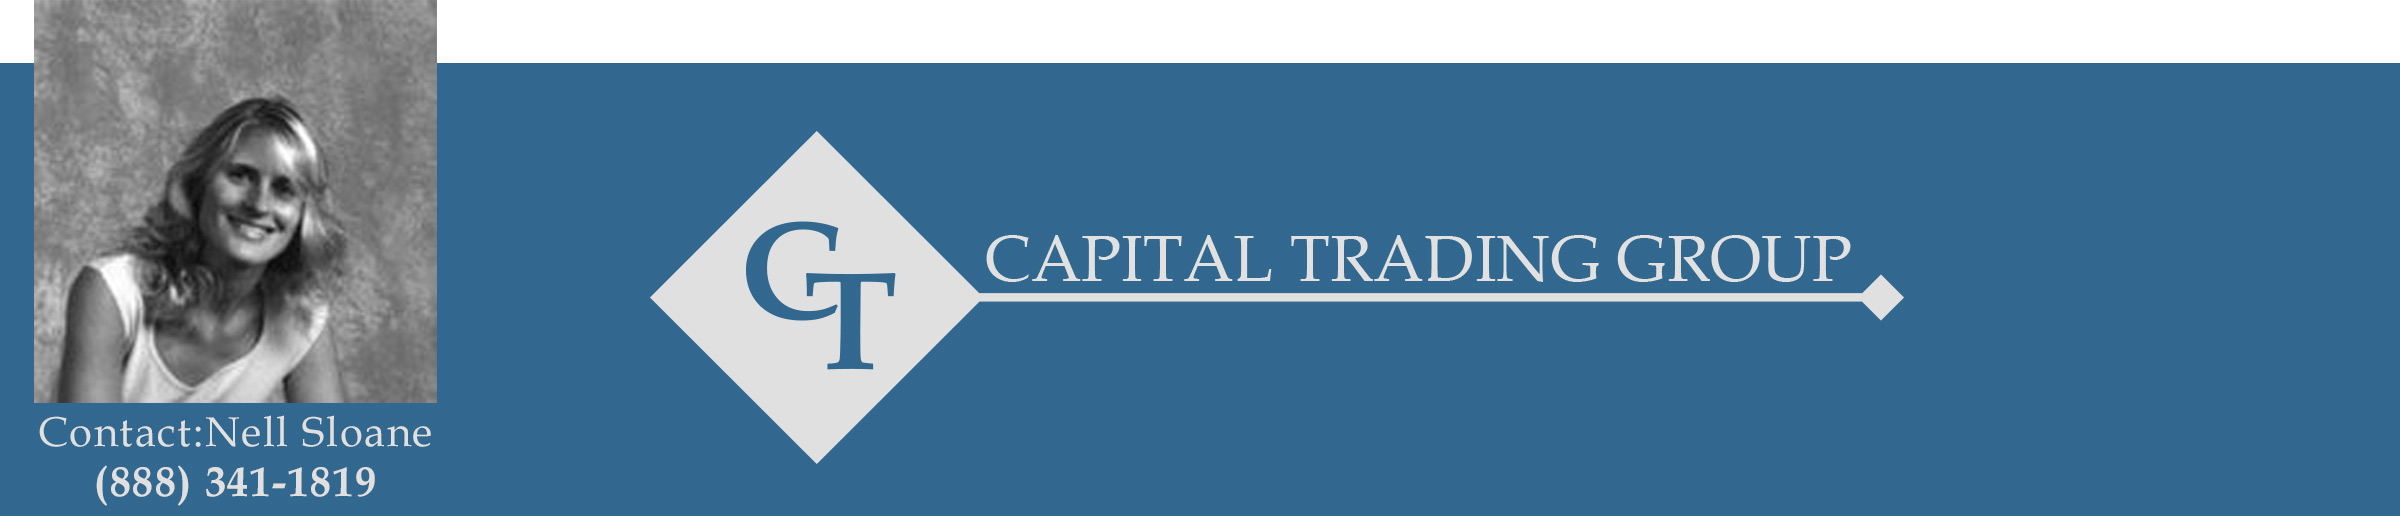 Contact Nell Sloane at the Capital Trading Group